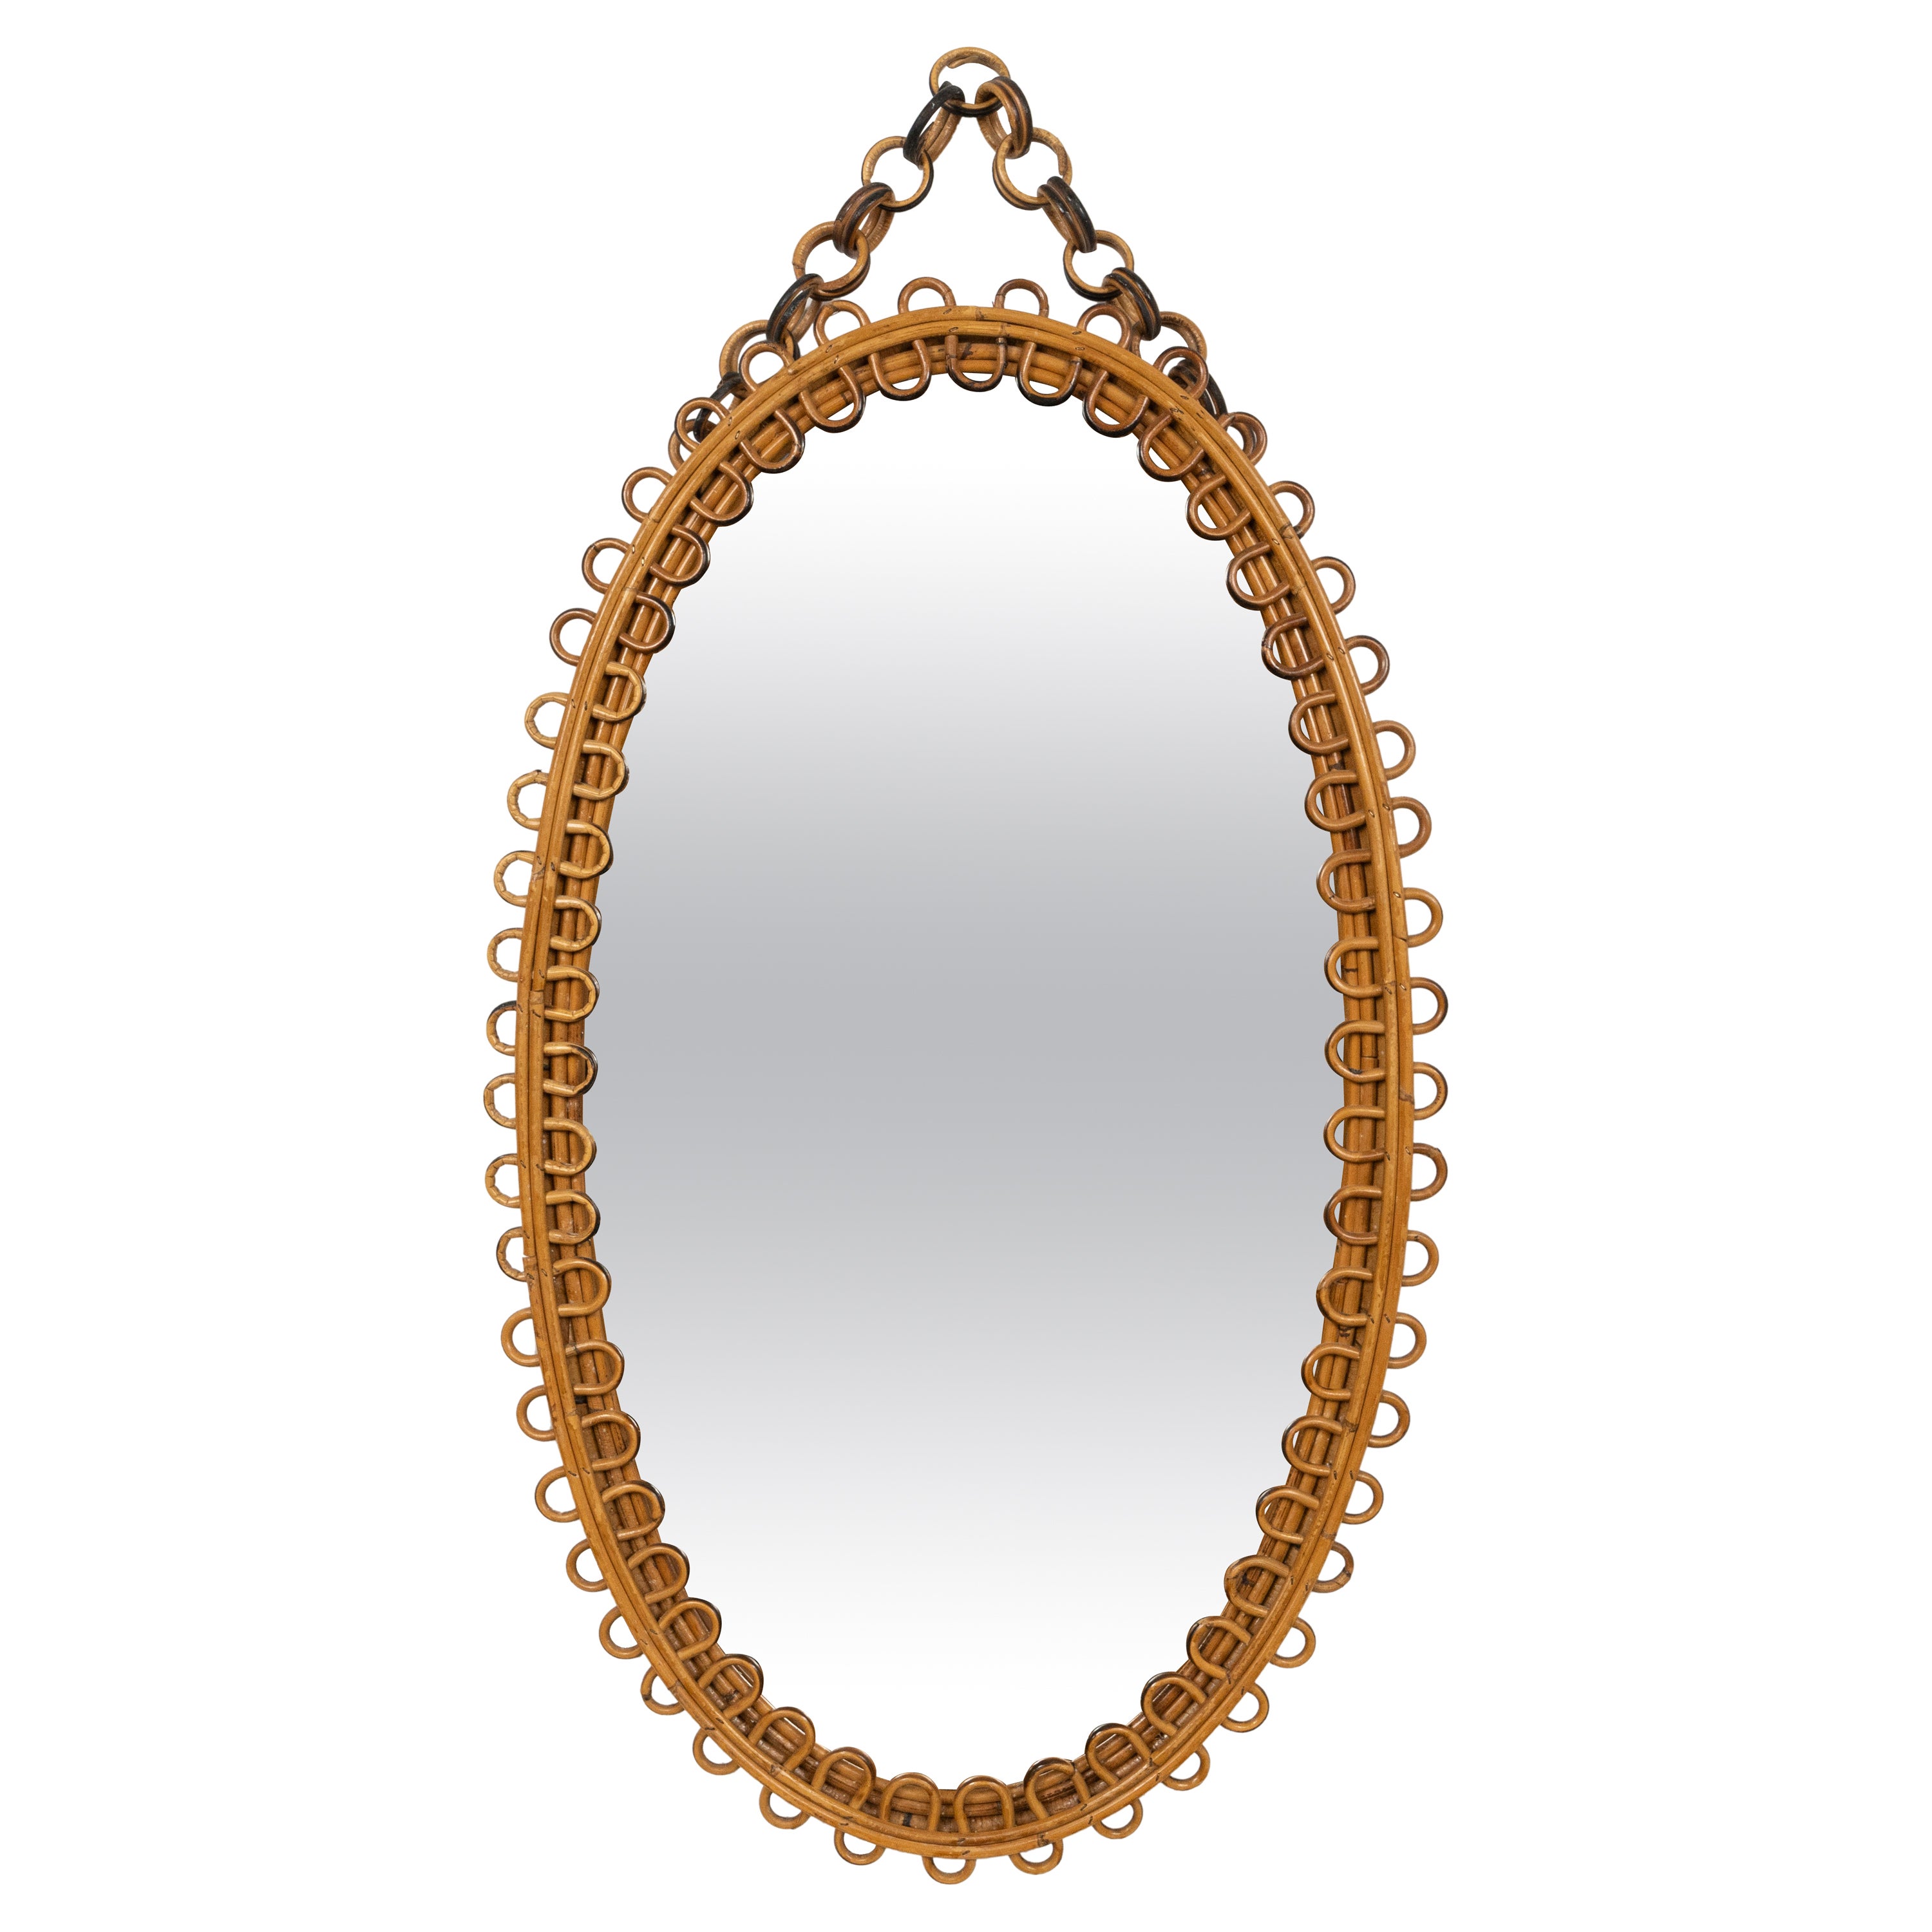 Rattan and Bamboo Oval Wall Mirror with Chain Franco Albini Style, Italy, 1960s For Sale